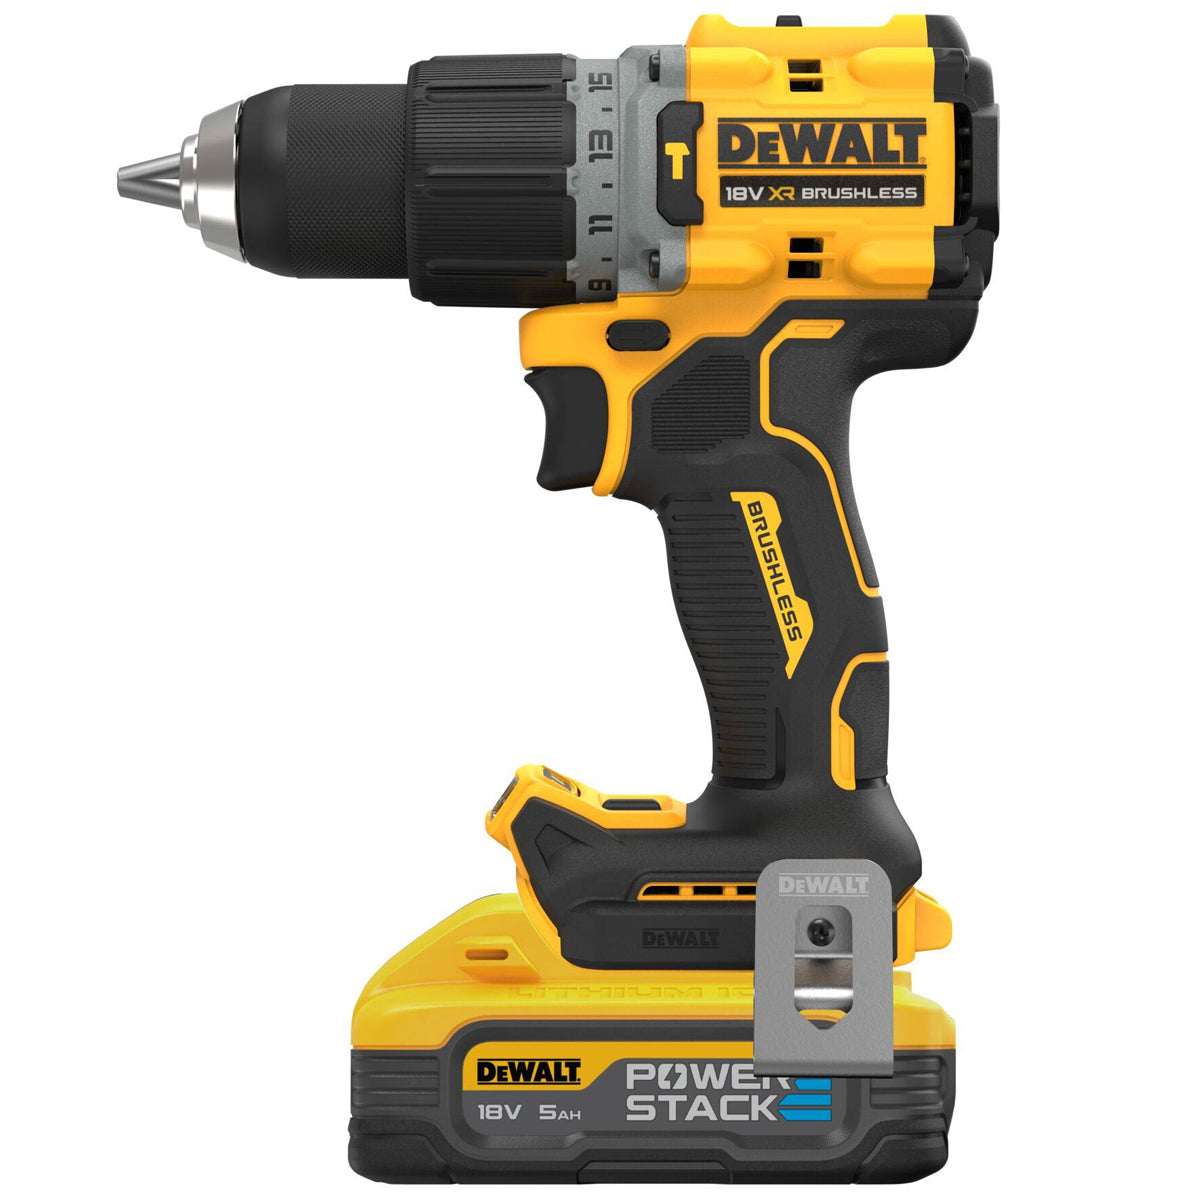 Dewalt DCK2050H2T 18V XR Brushless Combi Drill and Impact Driver with 2 x 5.0Ah Battery & Charger